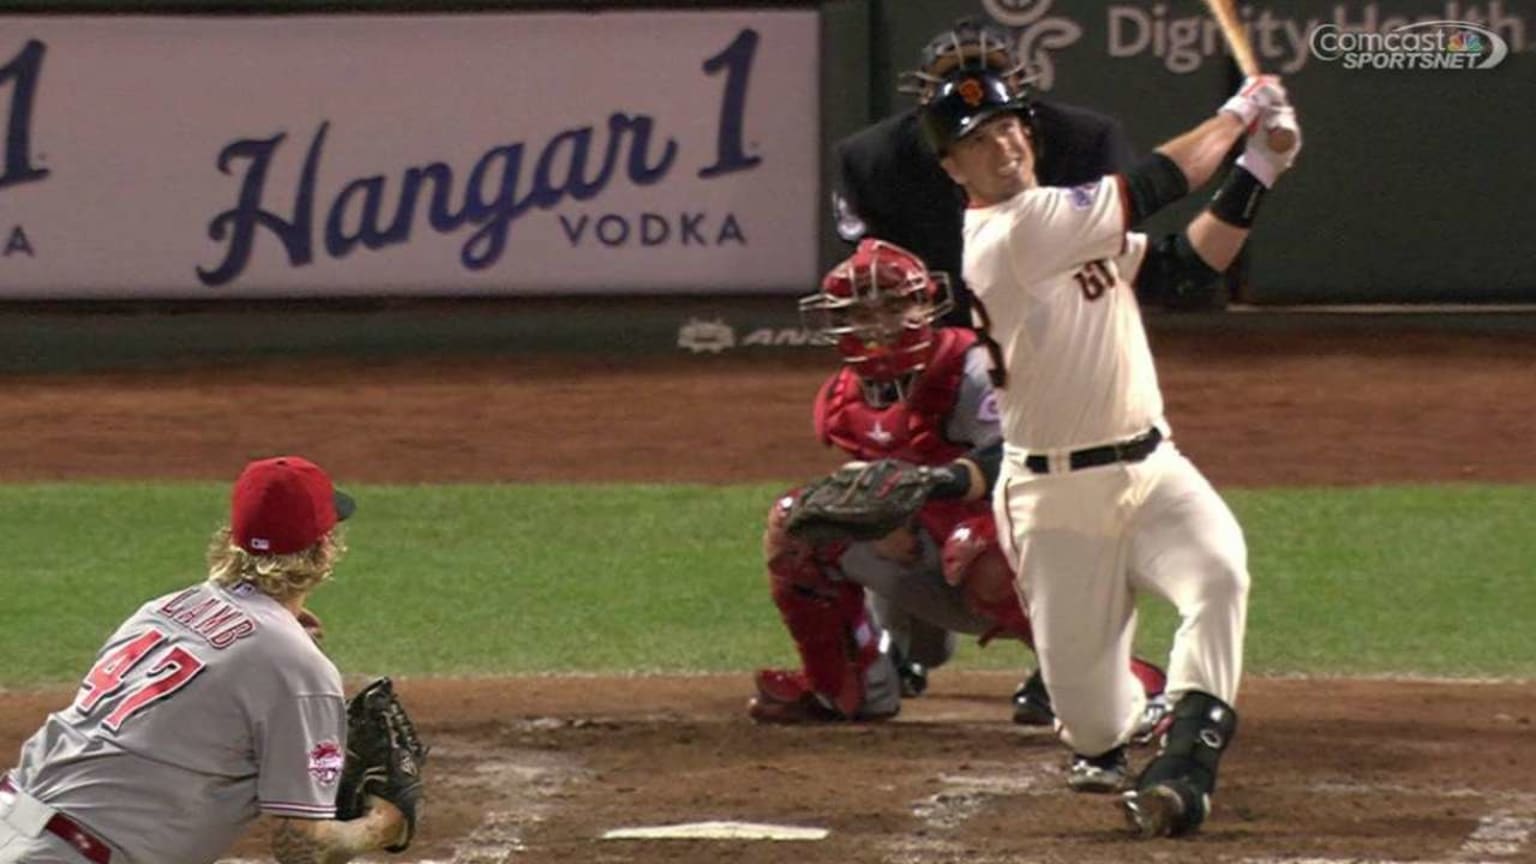 9/15/15: Buster Posey belts a towering three-run homer to left off John Lam...